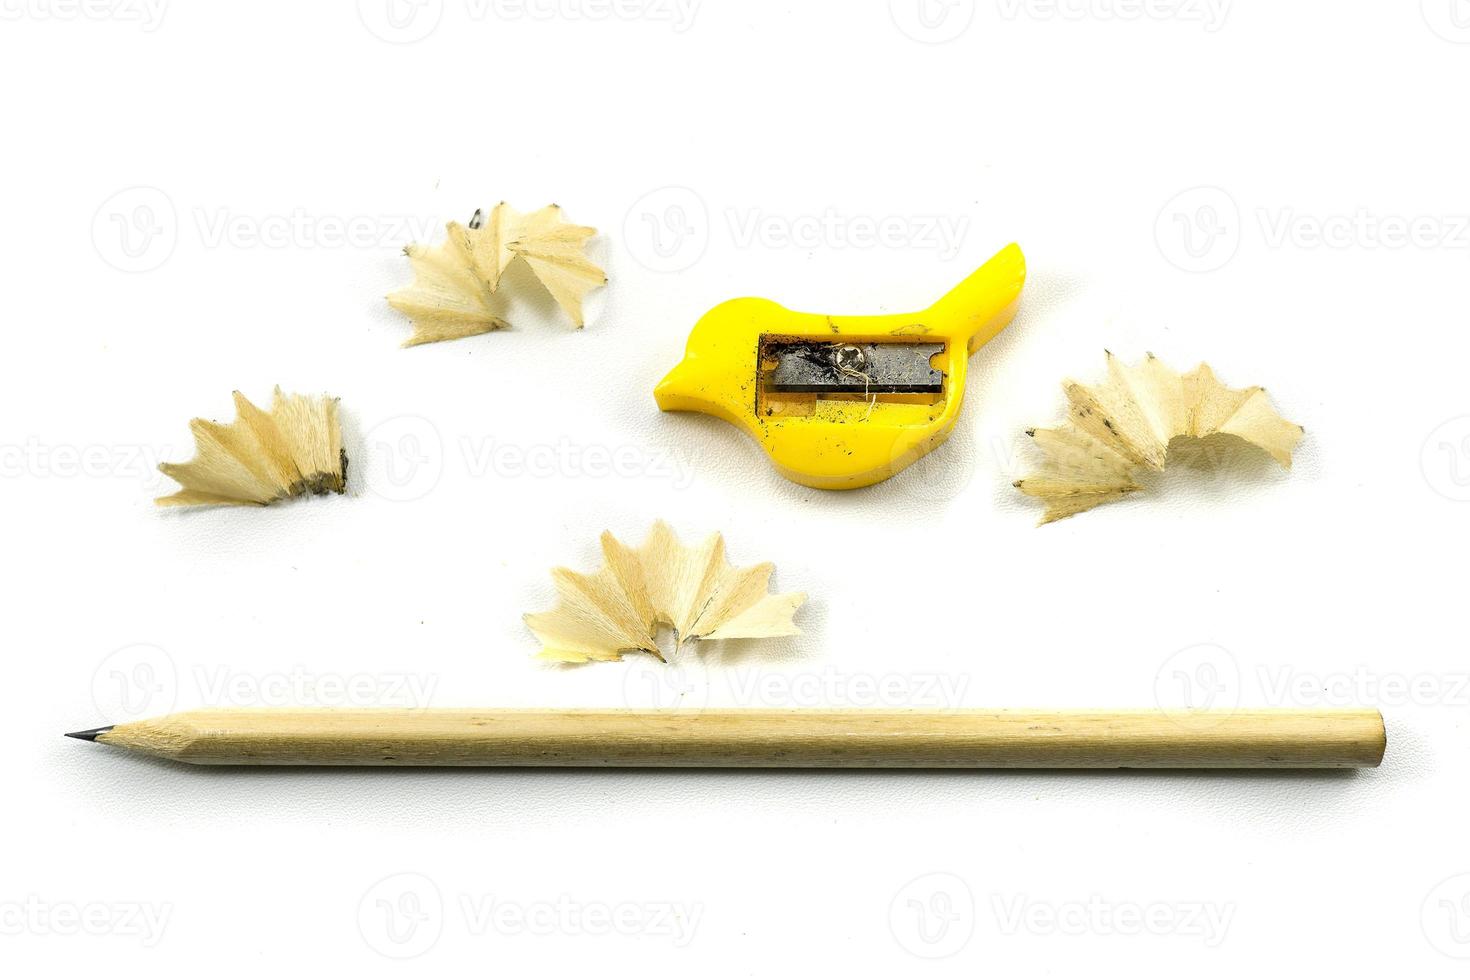 sharpener, wooden pencil and pencil shavings isolated on white photo